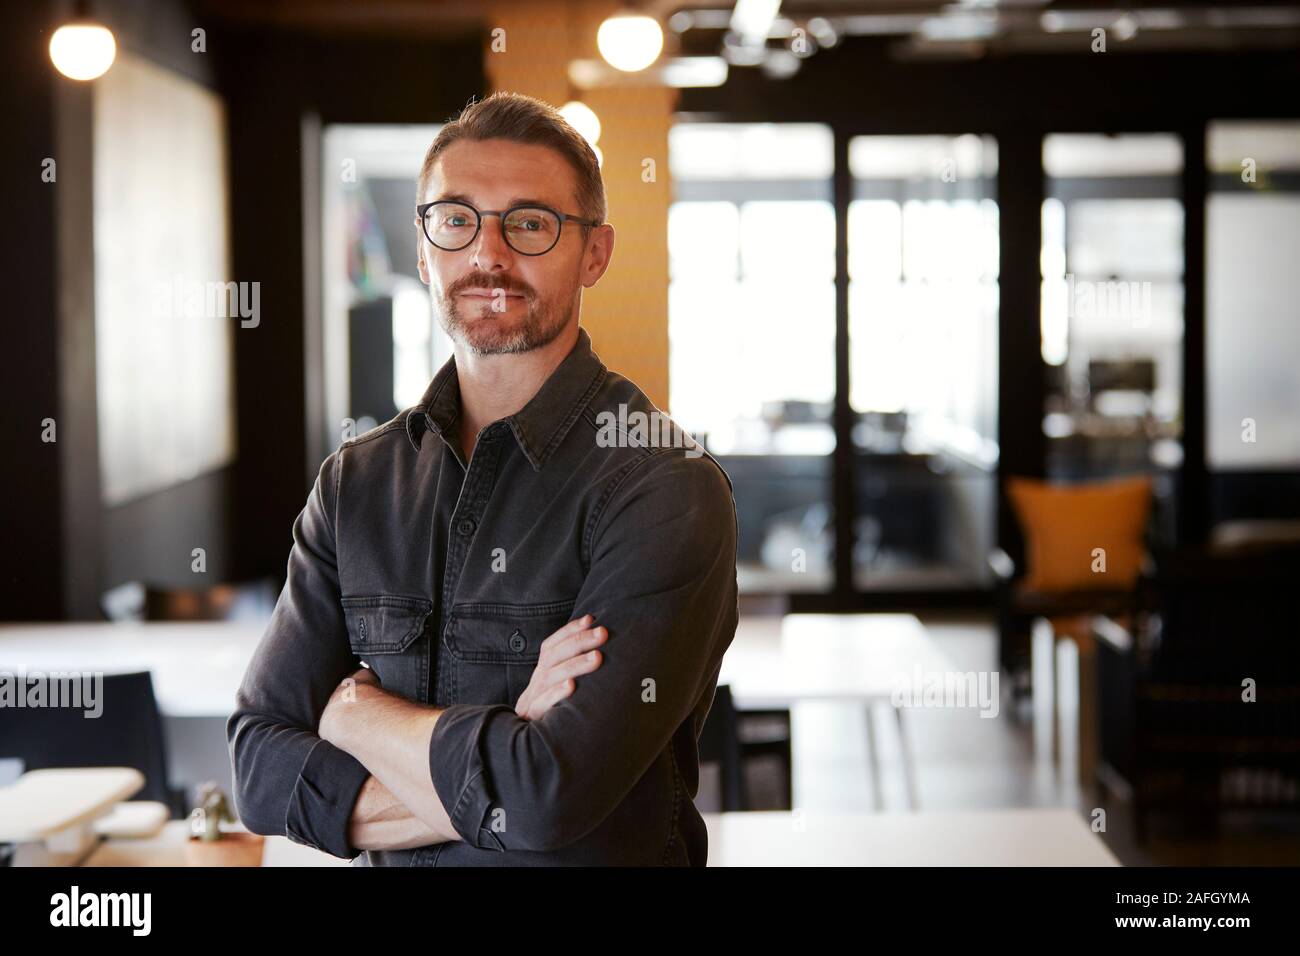 Middle aged white male creative wearing glasses standing in an office looking to camera, waist up Stock Photo